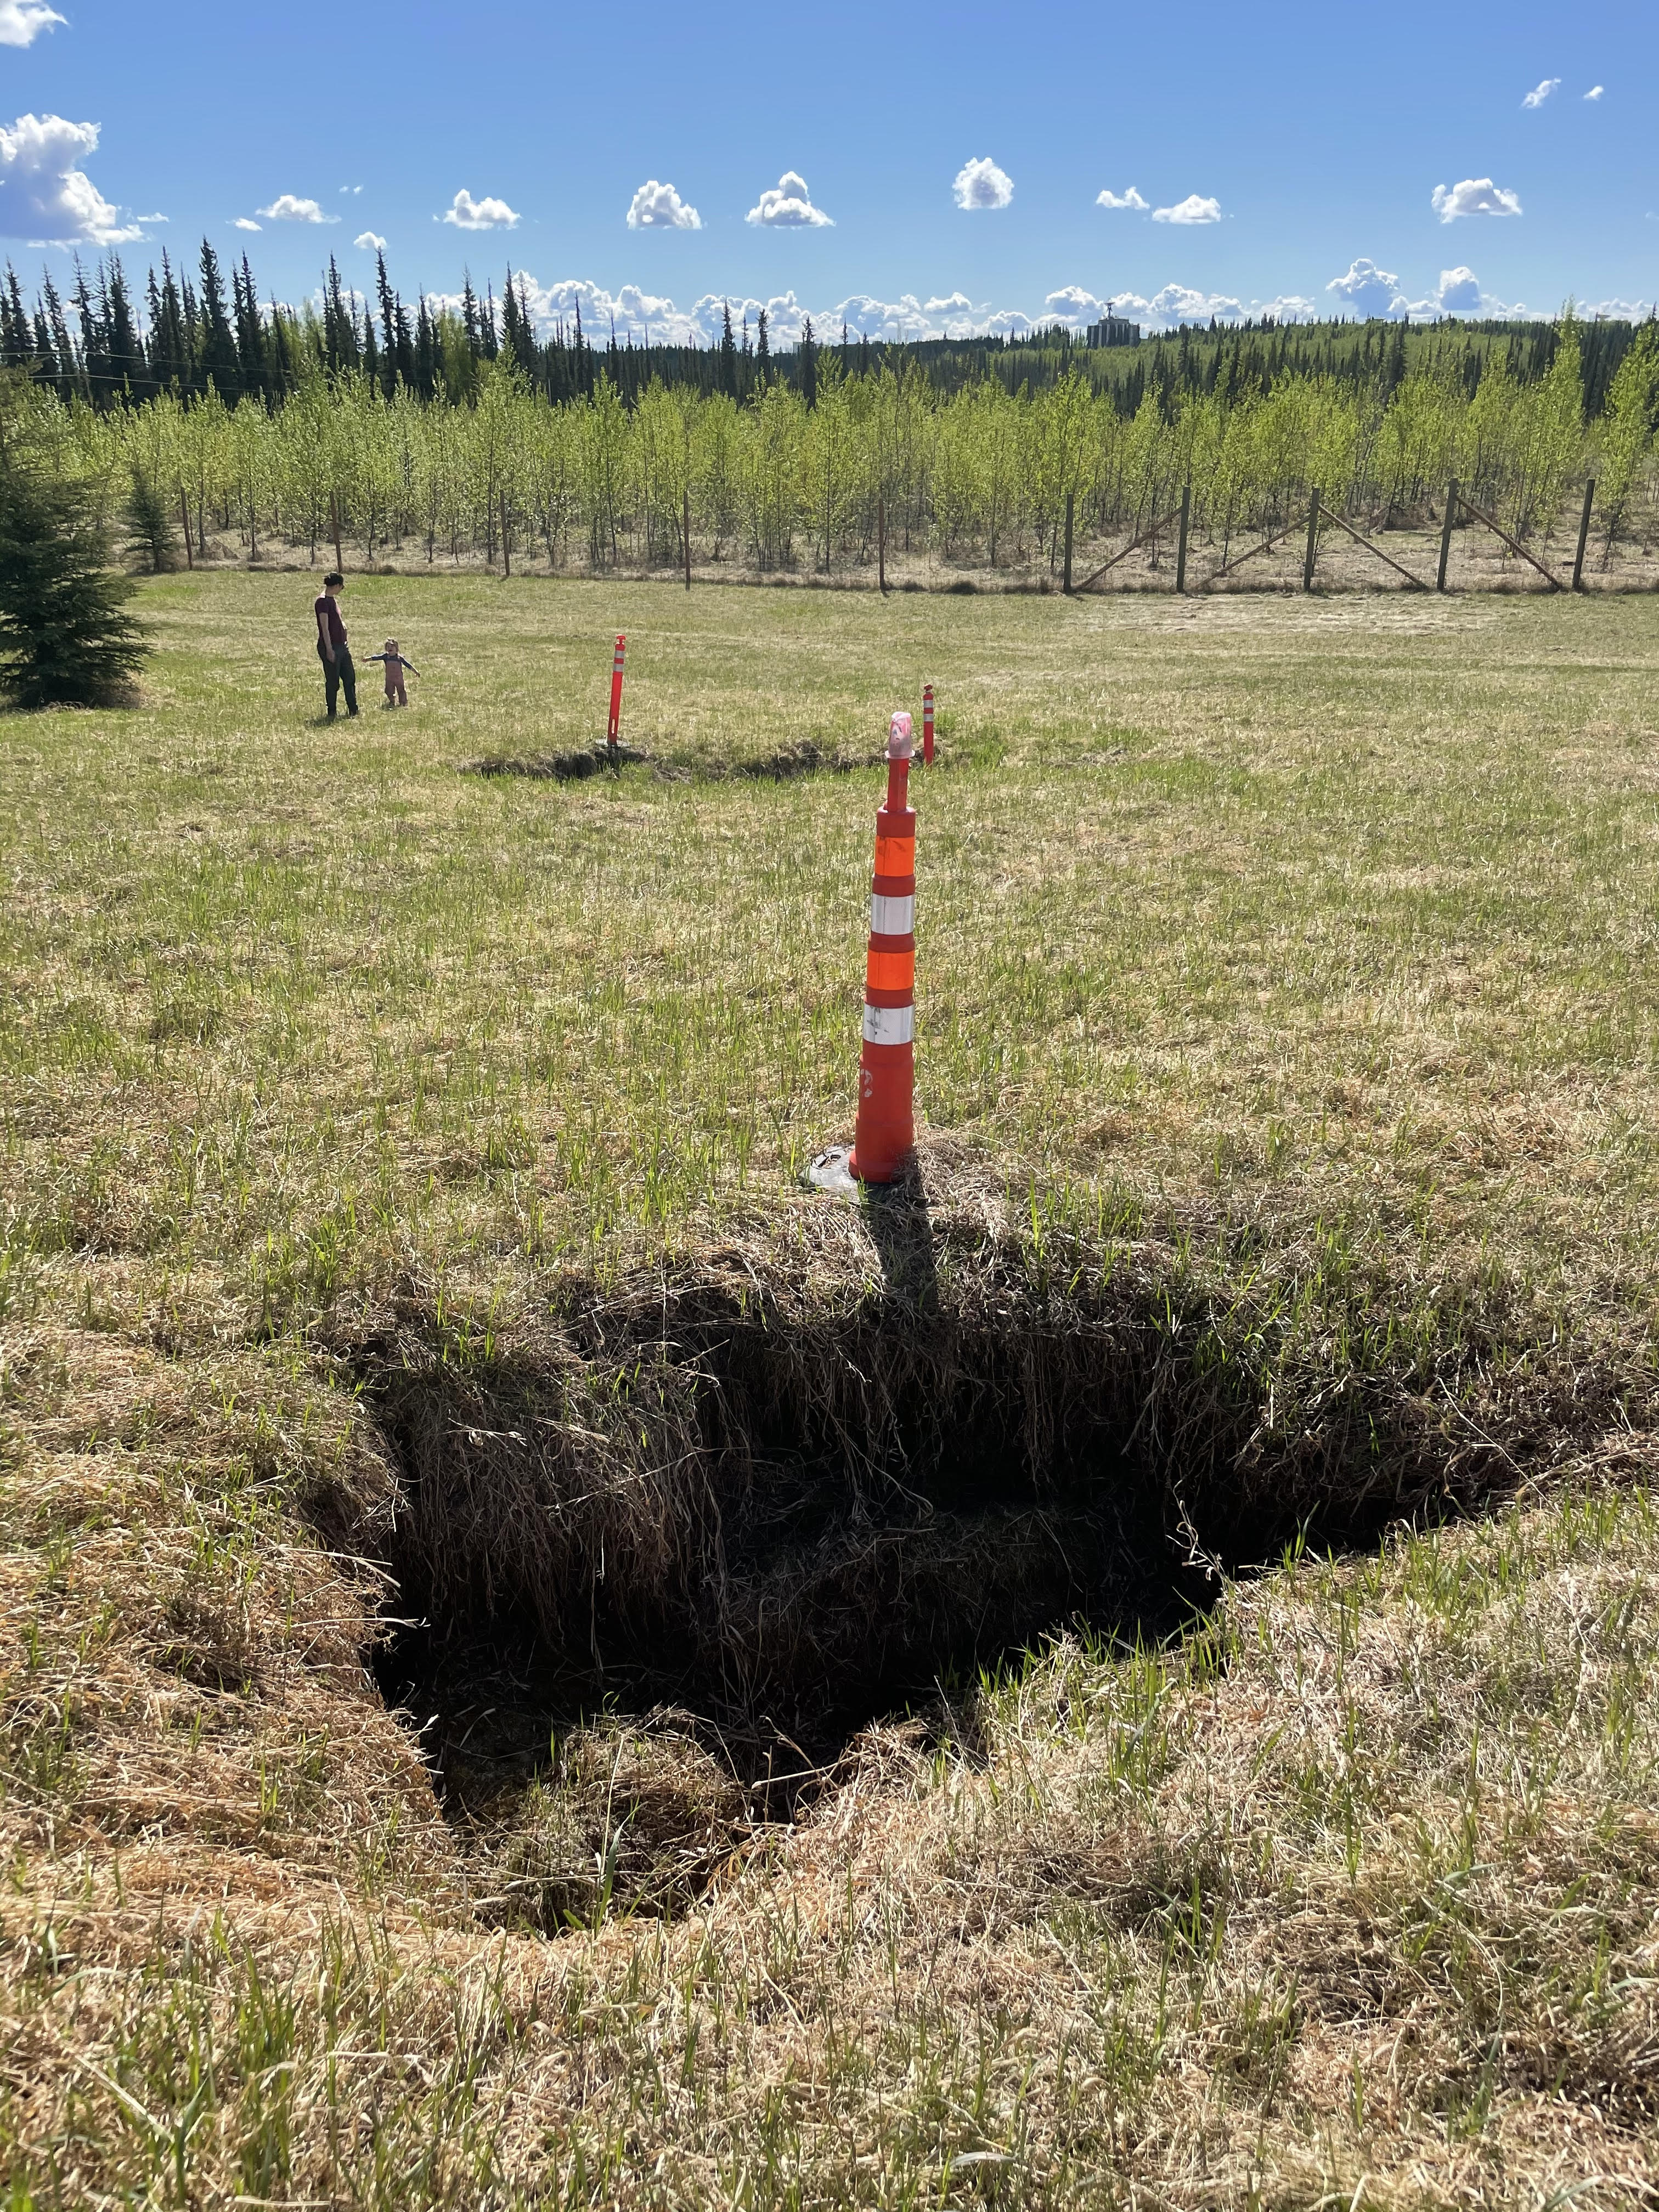 A hole in a grassy field with an orange caution cone.